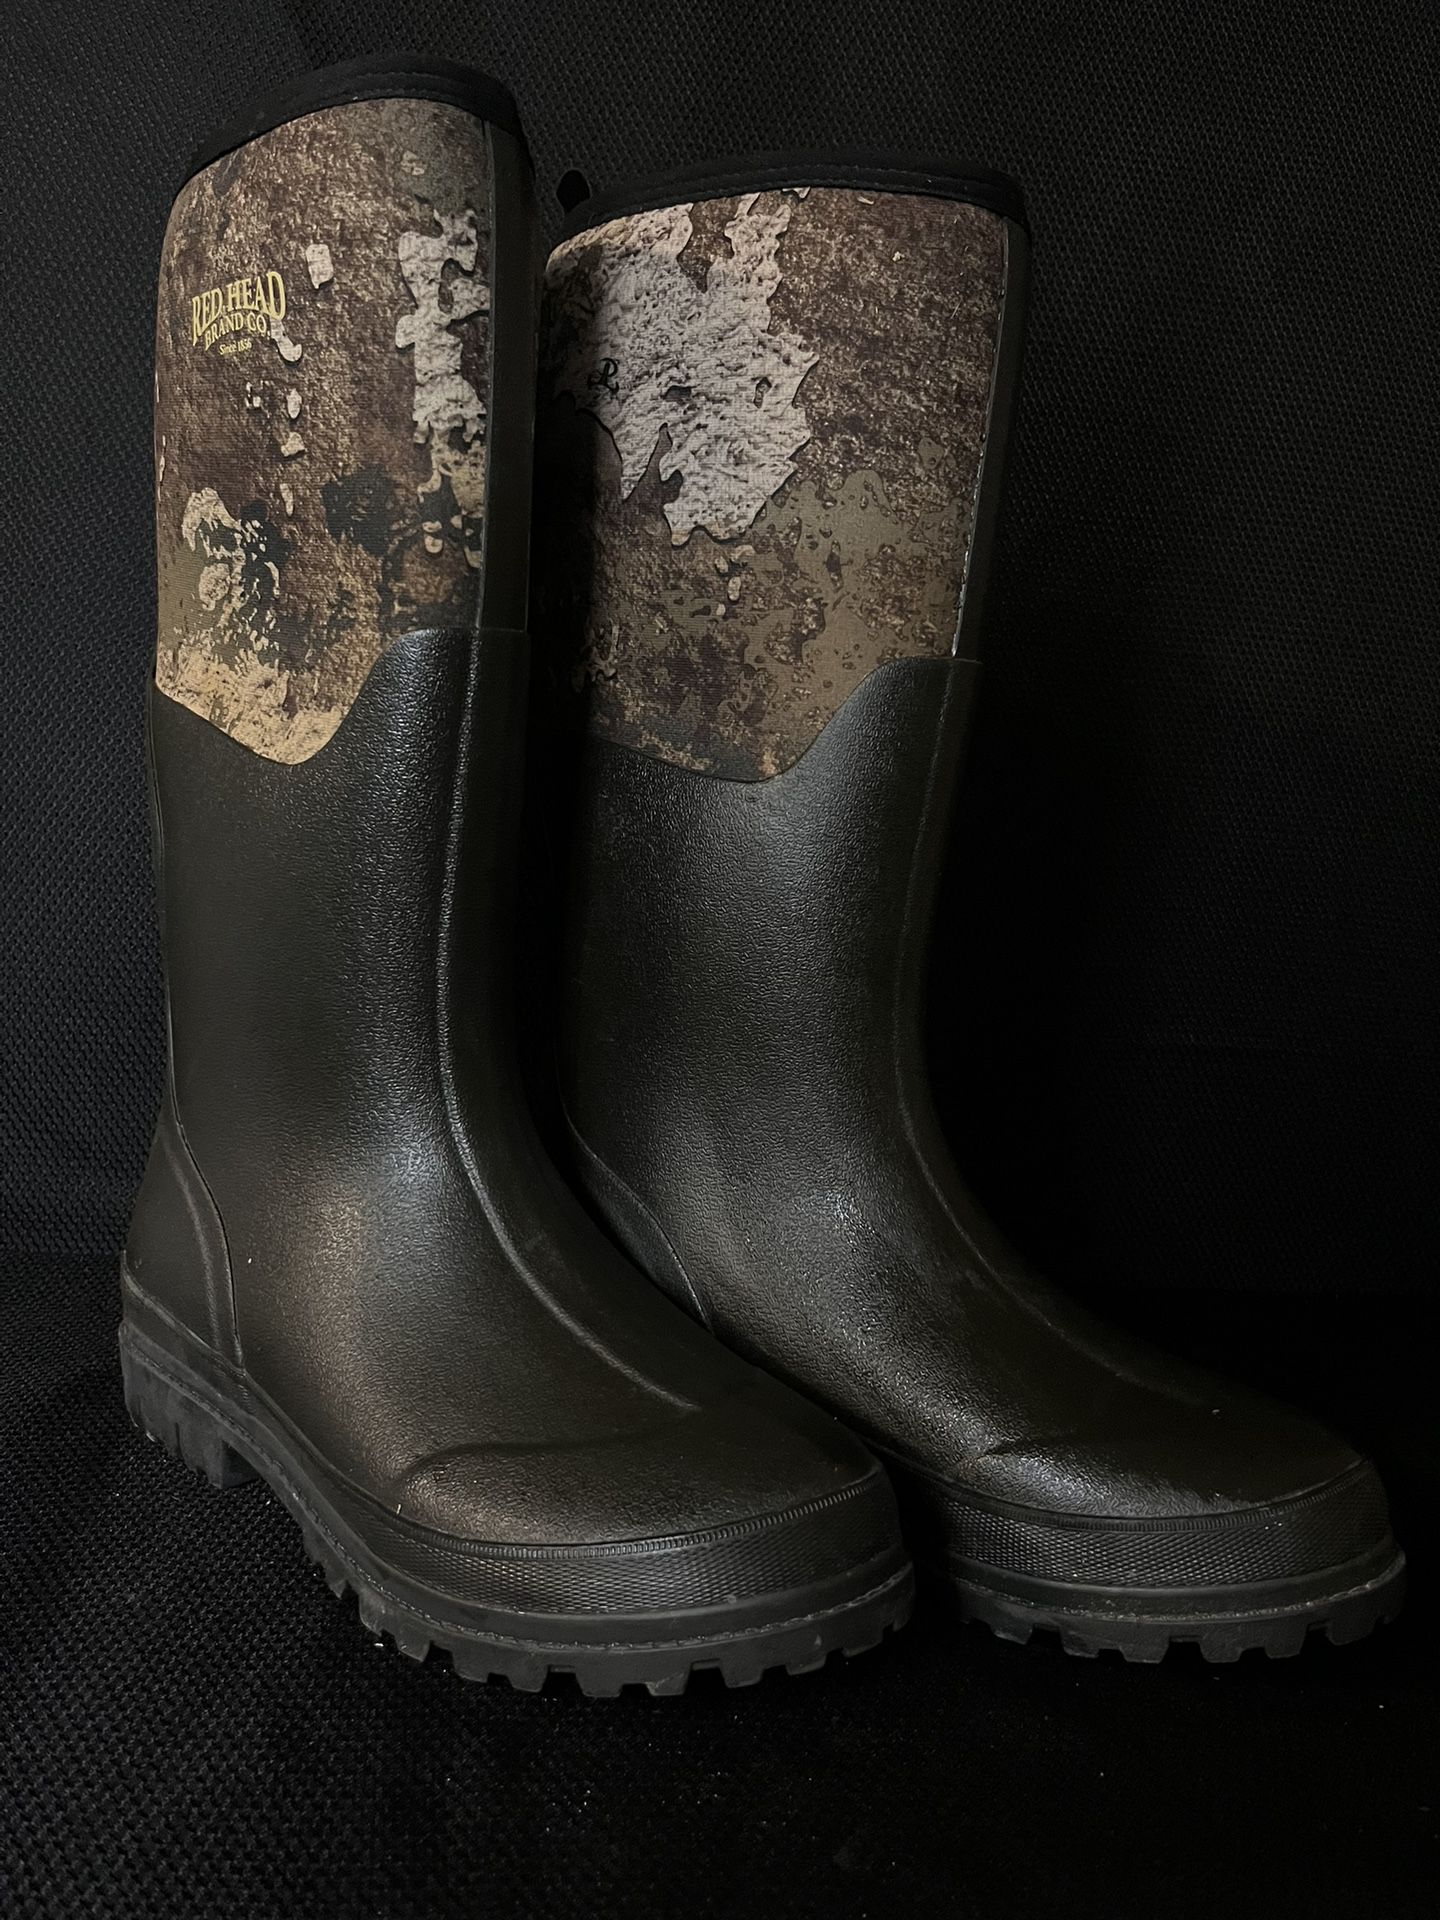 Red Head Waterproof Camouflage Pull On Black Hunting Outdoor Rain Boots Size 10